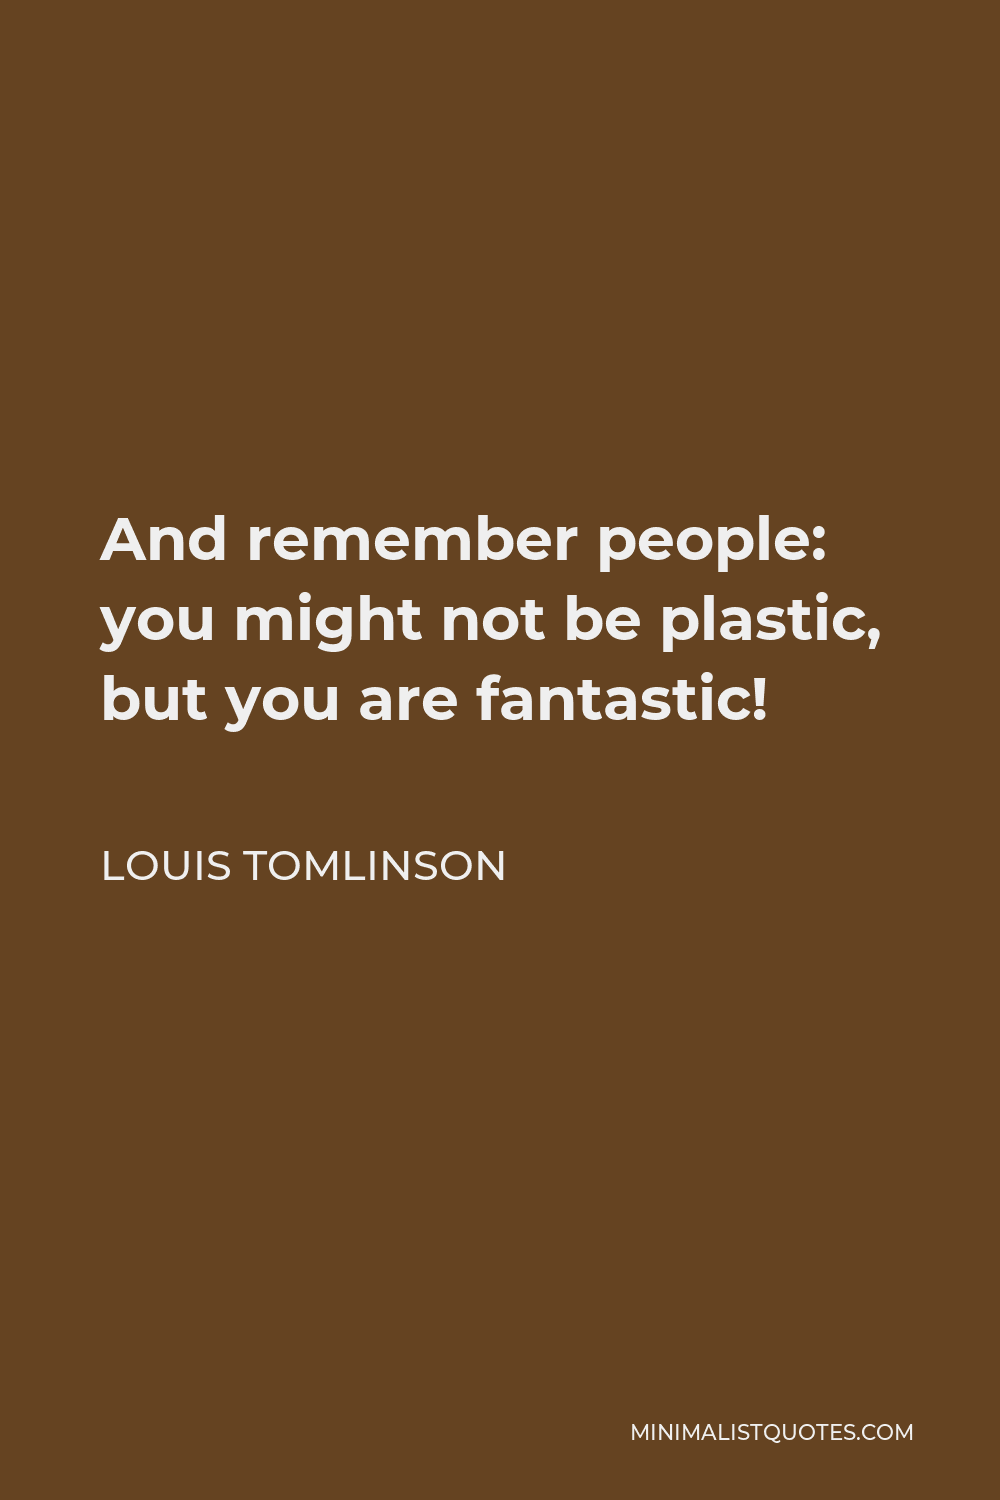 Louis Tomlinson Quote - And remember people: you might not be plastic, but you are fantastic!